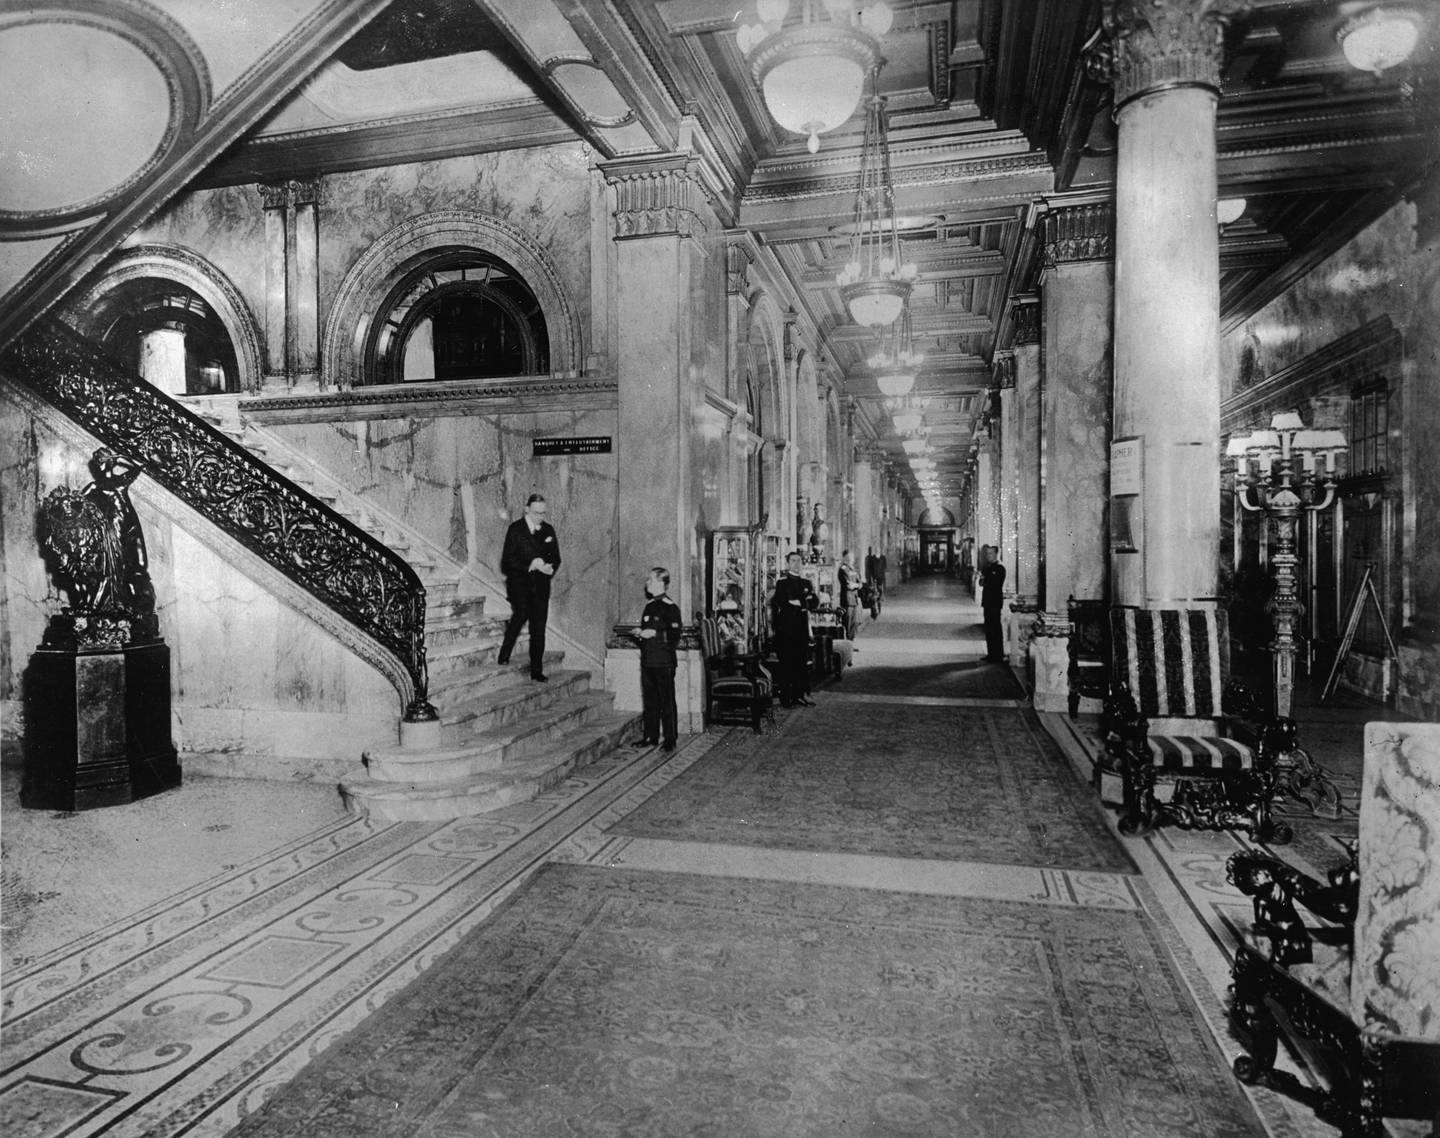 Members of the Waldorf Astoria hotel staff stand in Peacock Alley awaiting guests in the 1910s. Getty Images